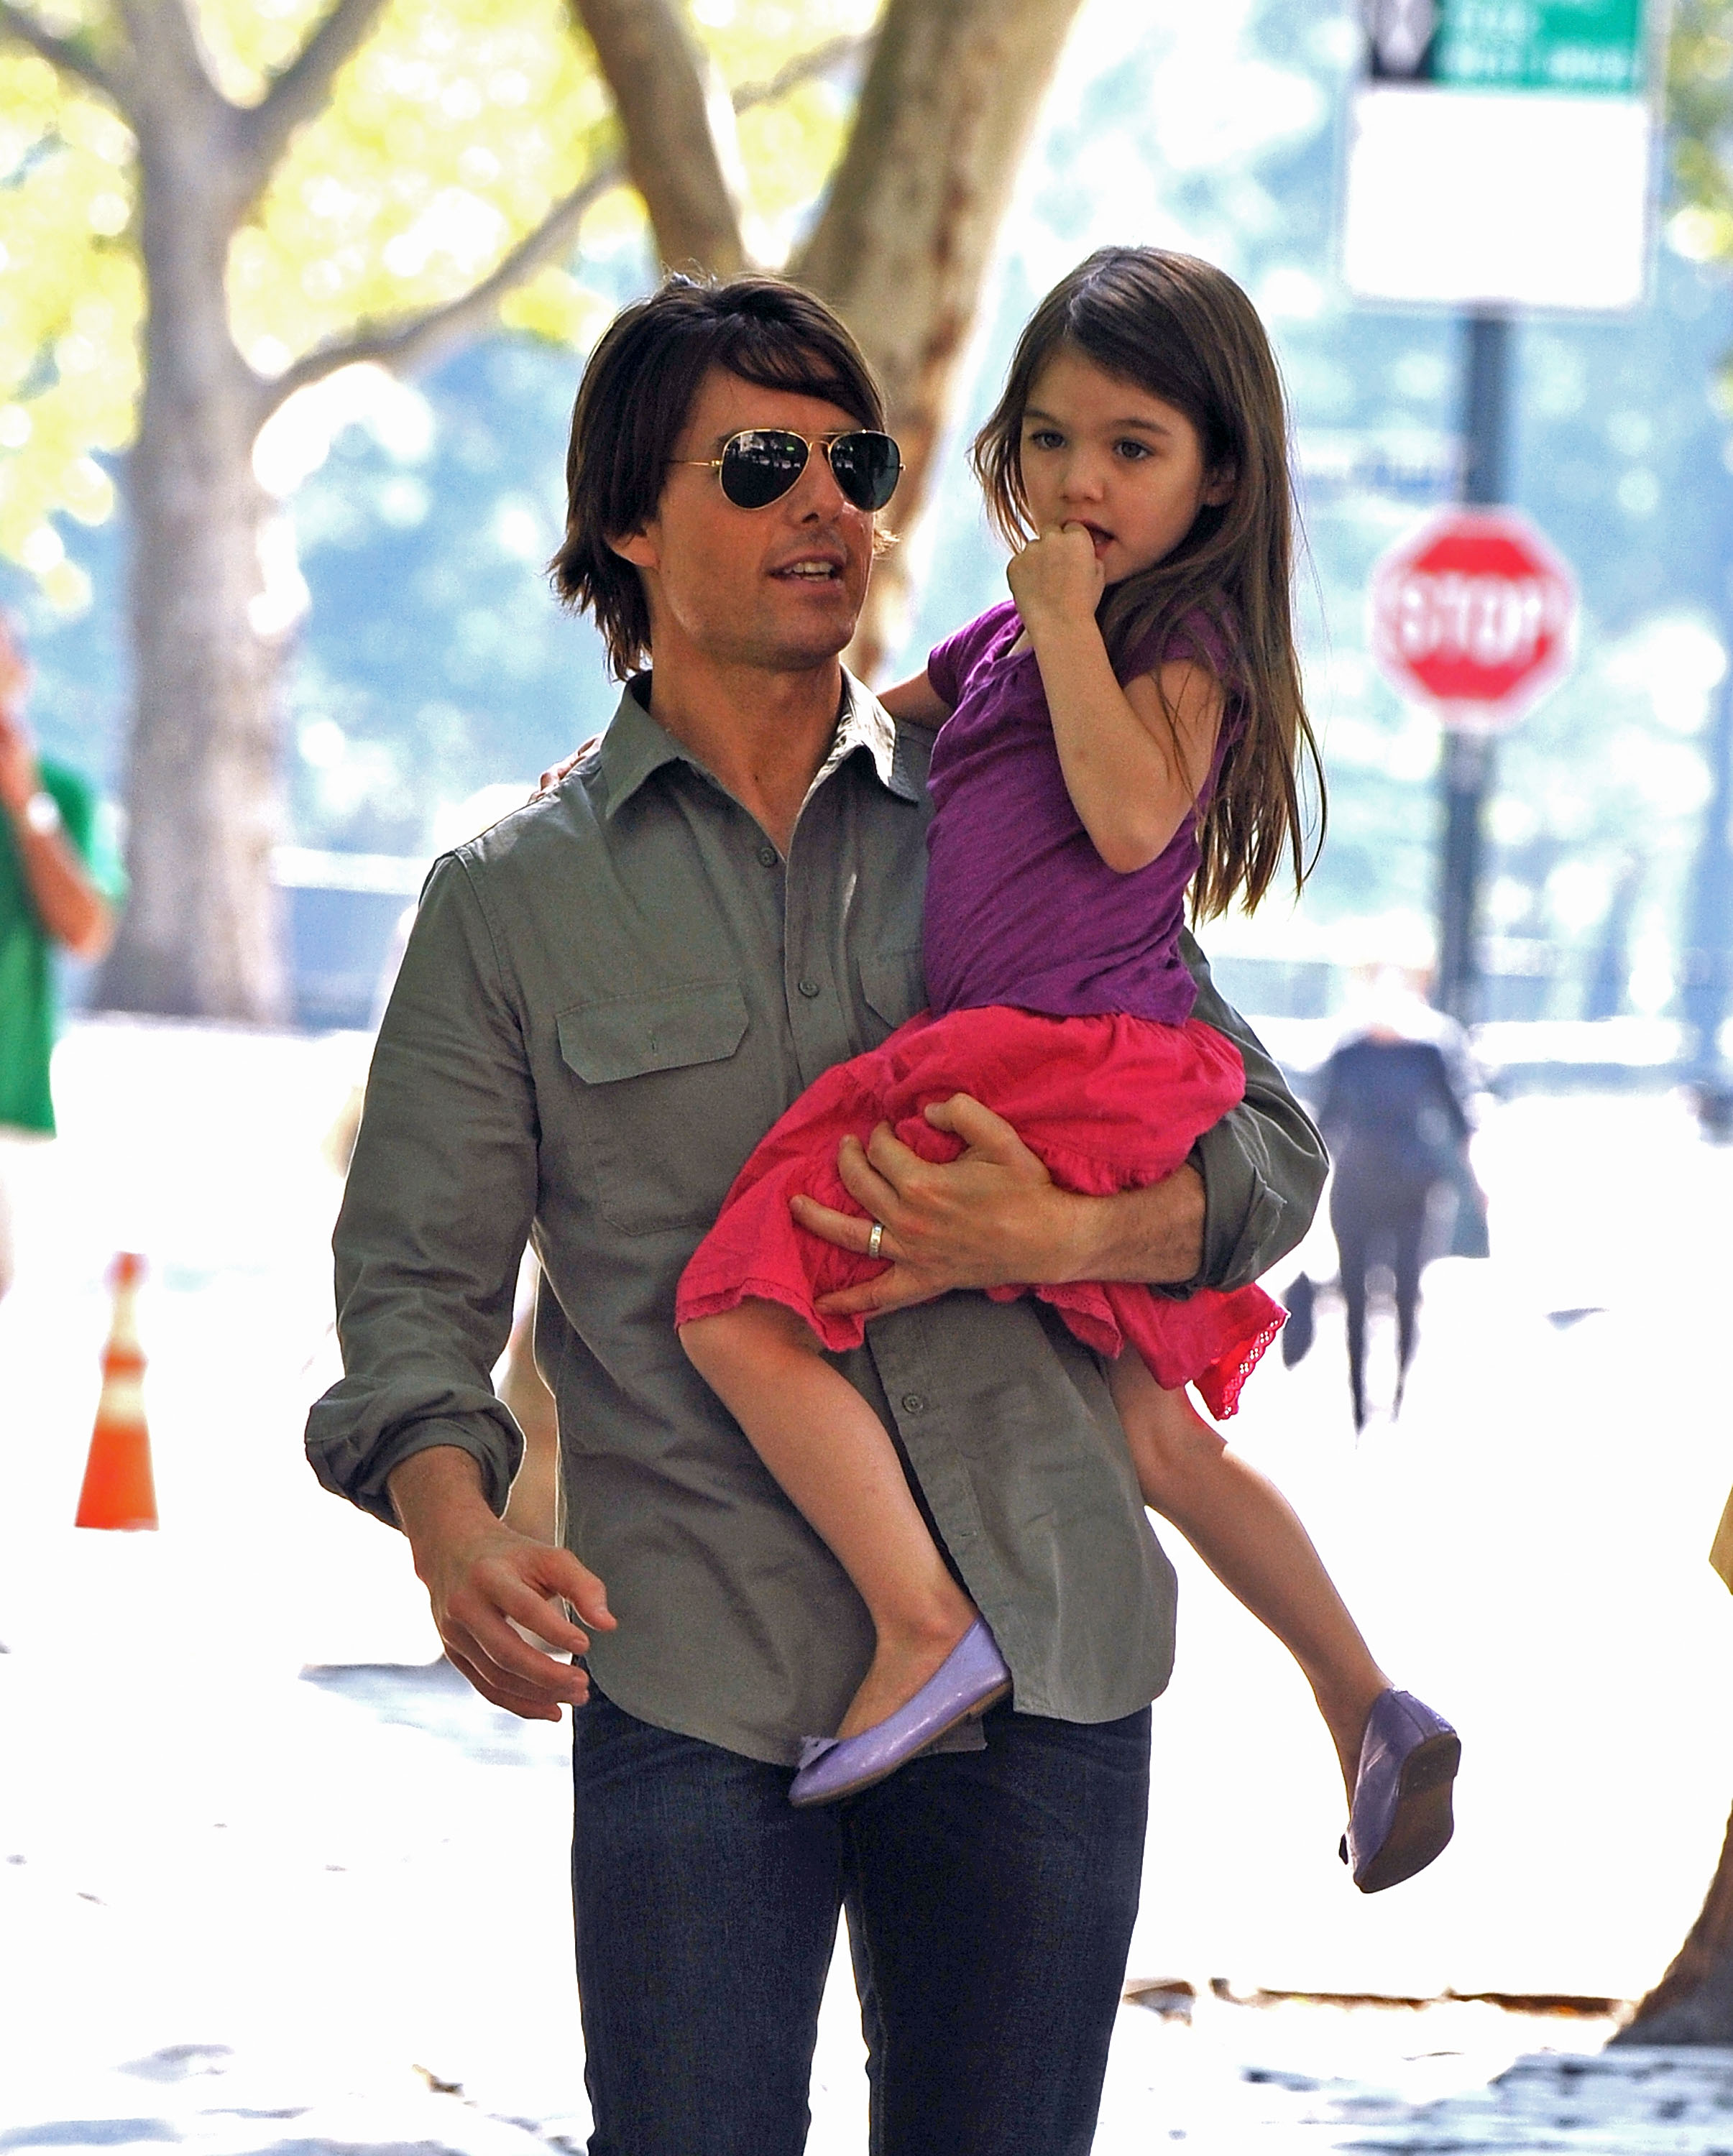 Tom Cruise and Suri Cruise visit a Central Park West playground on September 7, 2010 in New York City | Source: Getty Images